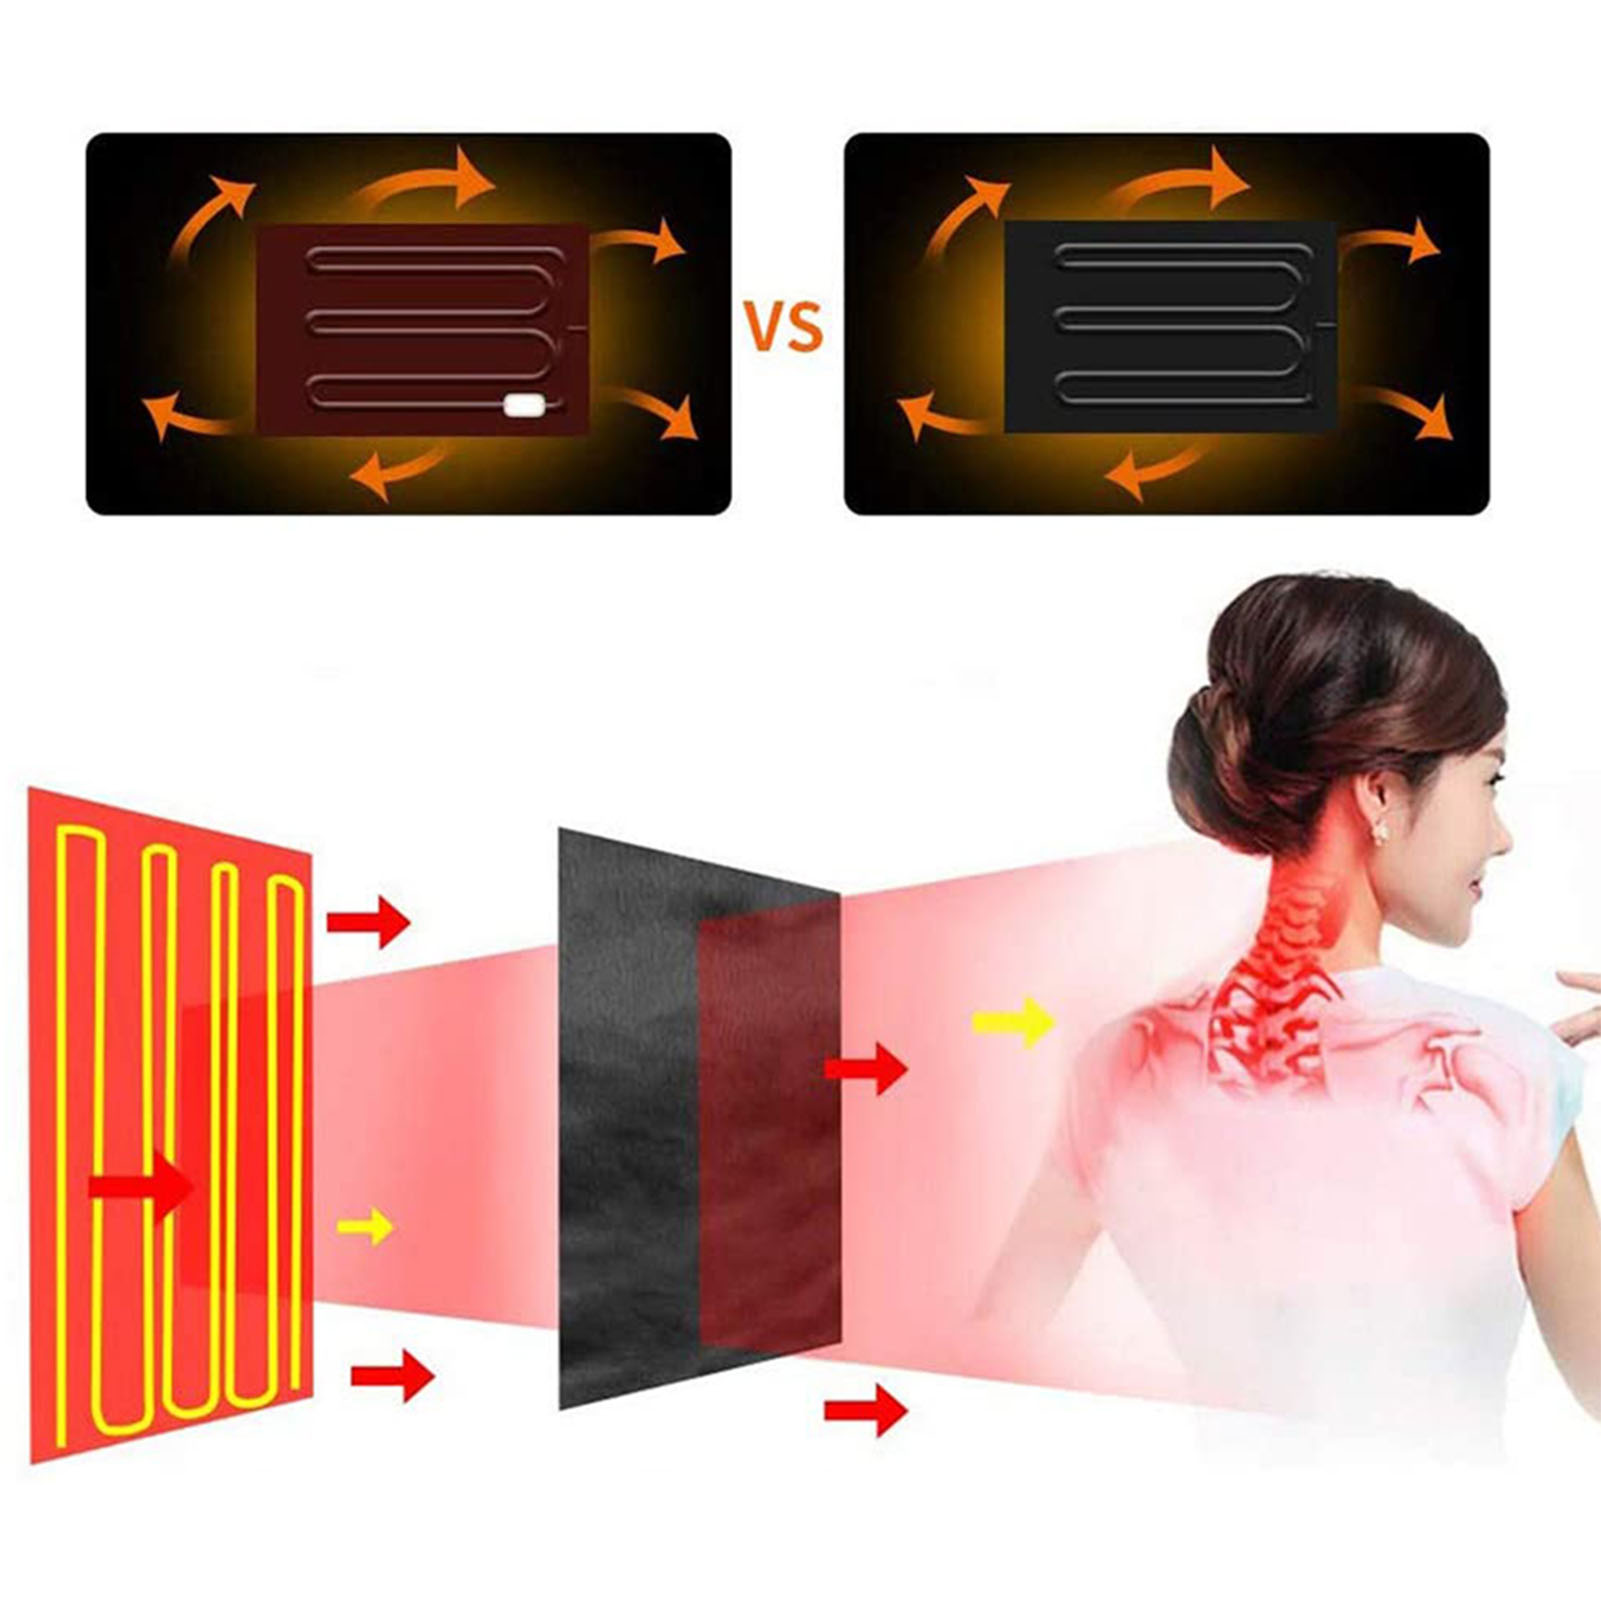 USB Heating Blanket Wearable Heating Shawl 3 Heat Settings With Timing Function Winter Soft Warm Electric Blanket Shawl 120x80cm